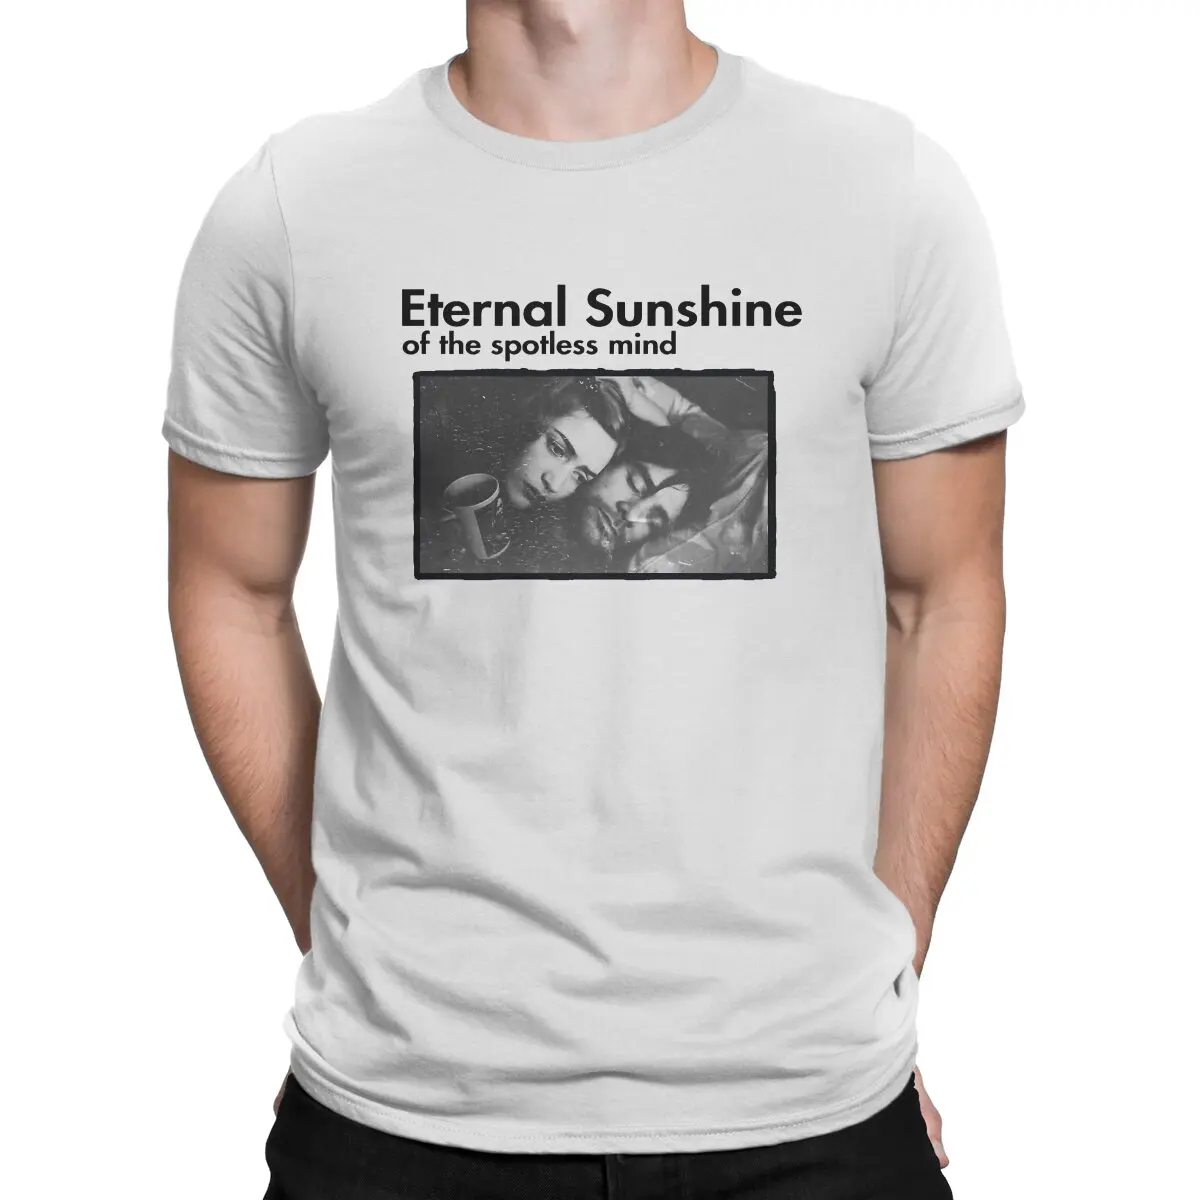 

Funny Main Character Film T-Shirt for Men Crew Neck Cotton T Shirt Eternal Sunshine Of The Spotless Mind Short Sleeve Tee